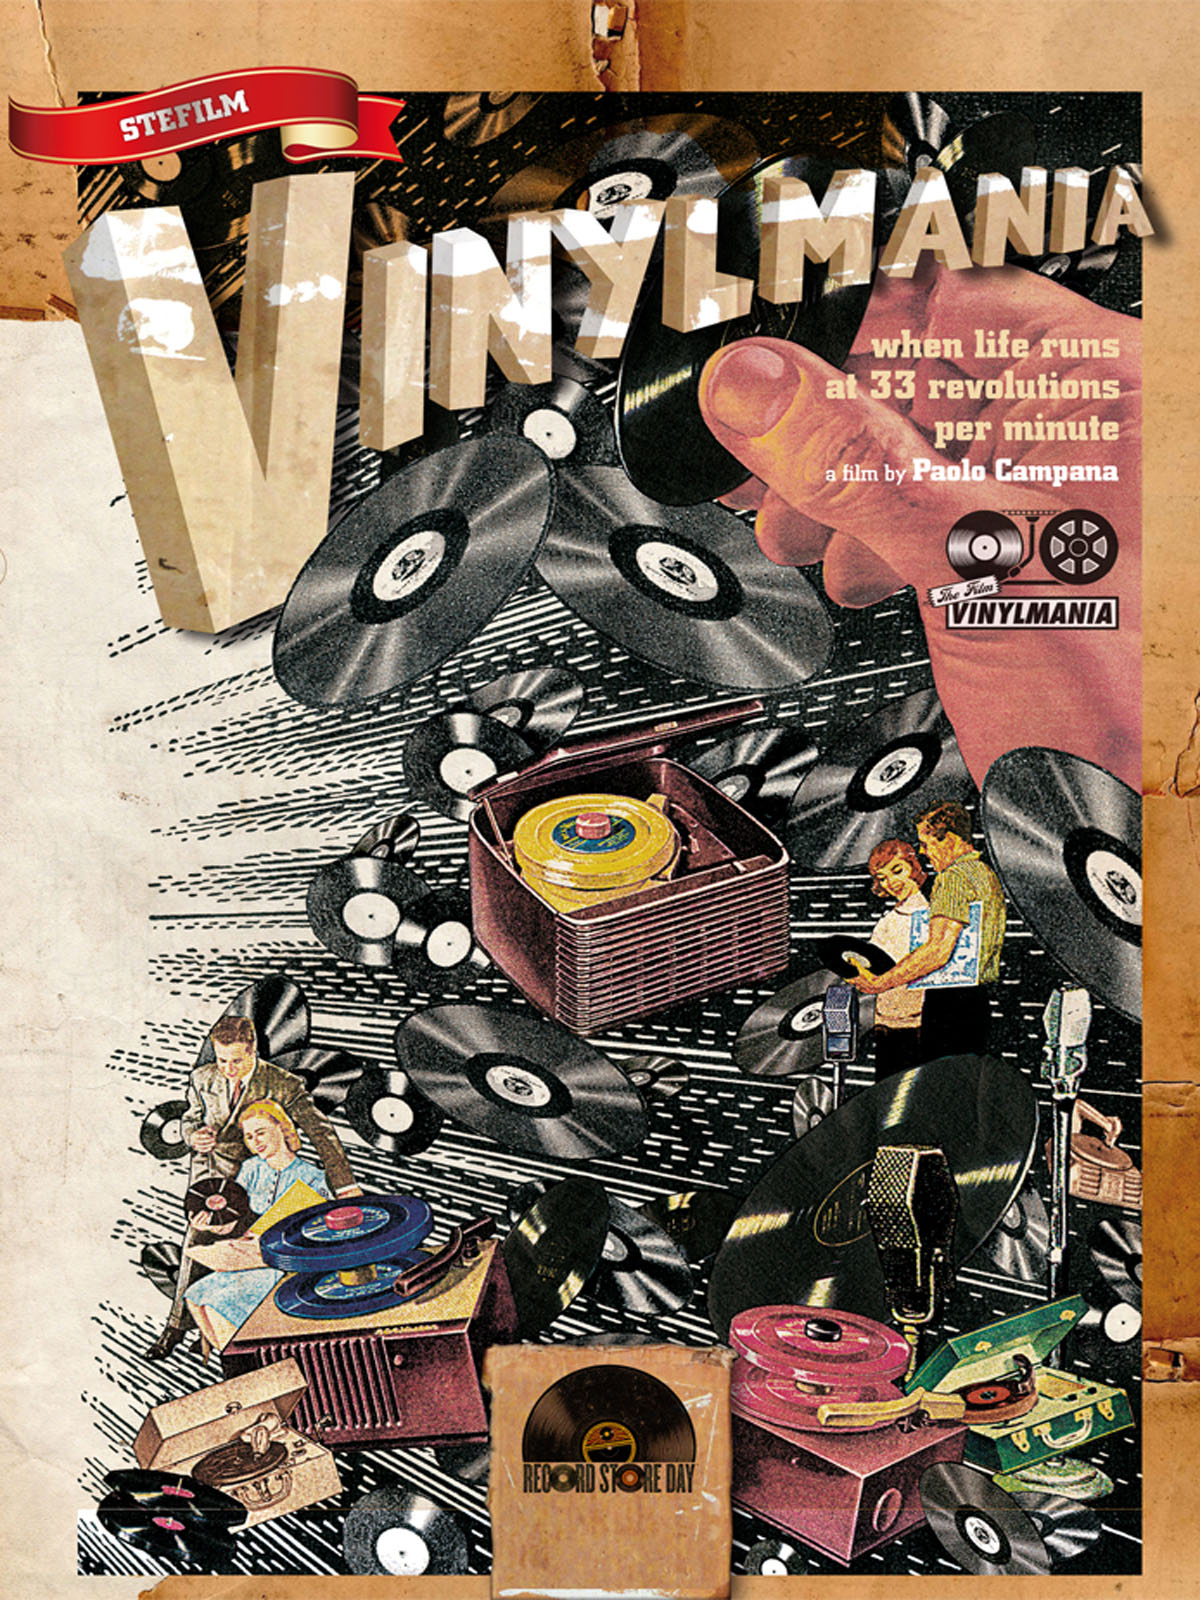 Vinylmania: When Life Runs at 33 Revolutions Per Minute (2012) with English Subtitles on DVD on DVD